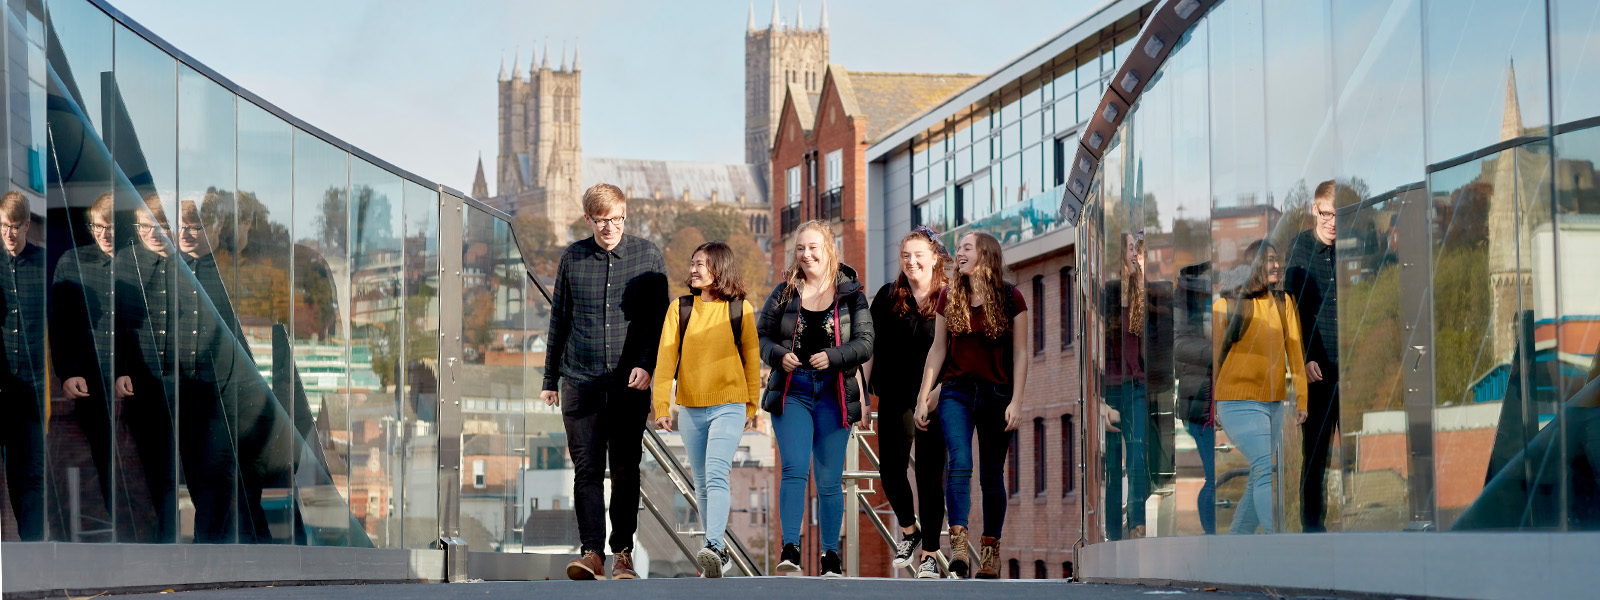 Group of students walking over a bridge with the cathedral in the background